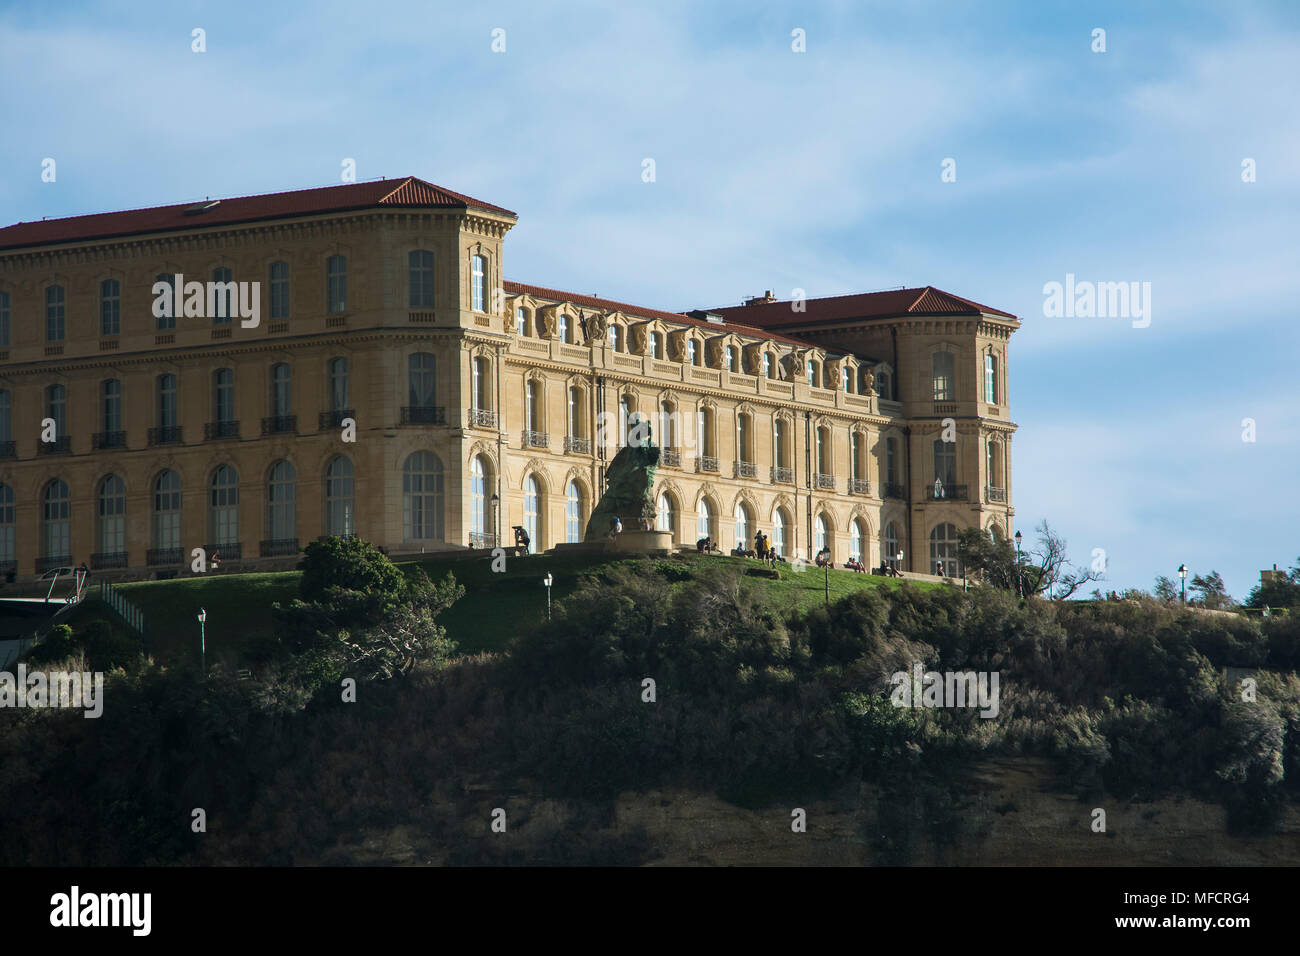 Marseilles,France-august 10,2016:view of the Pharo palace in Marseilles from the Fort saint Jean during a sunny day. Stock Photo